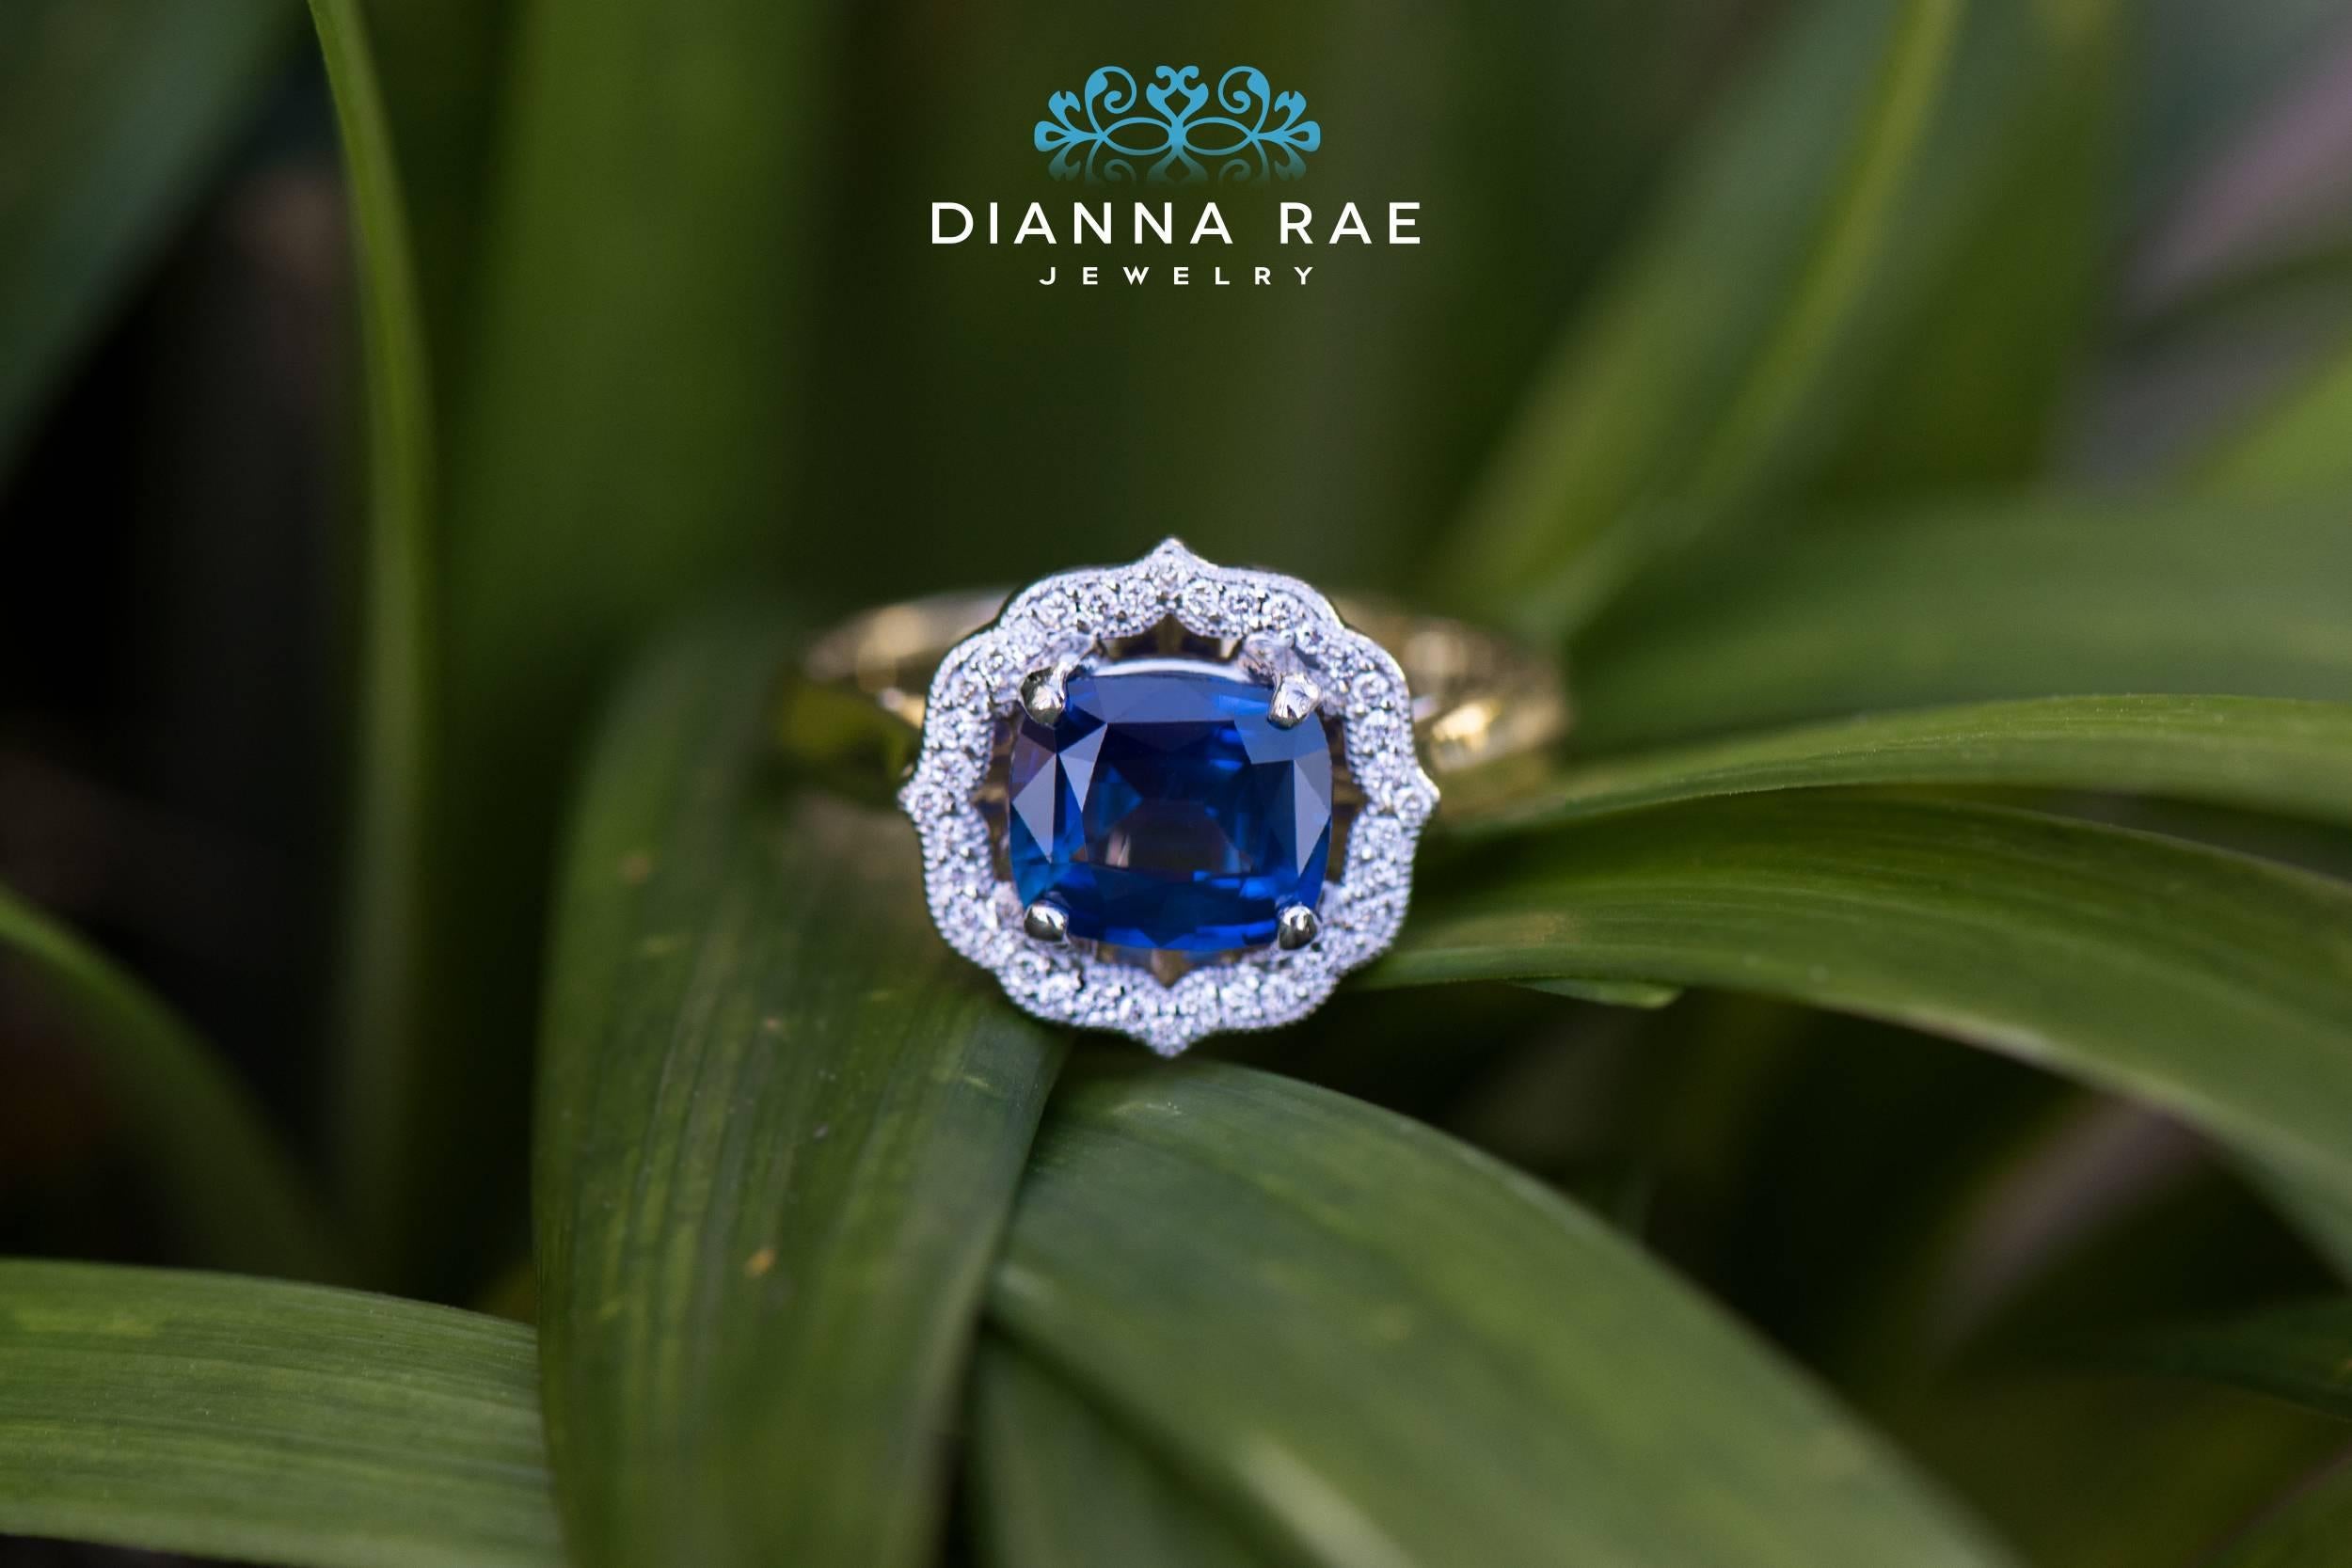 This gorgeous Rae-Halo Sapphire ring features a 1.44 carat cushion cut natural blue sapphire. There are 36 bright SI2 quality GH color diamonds brilliantly sparkling in a beautifully designed halo. This vintage and floral inspired ring is truly an